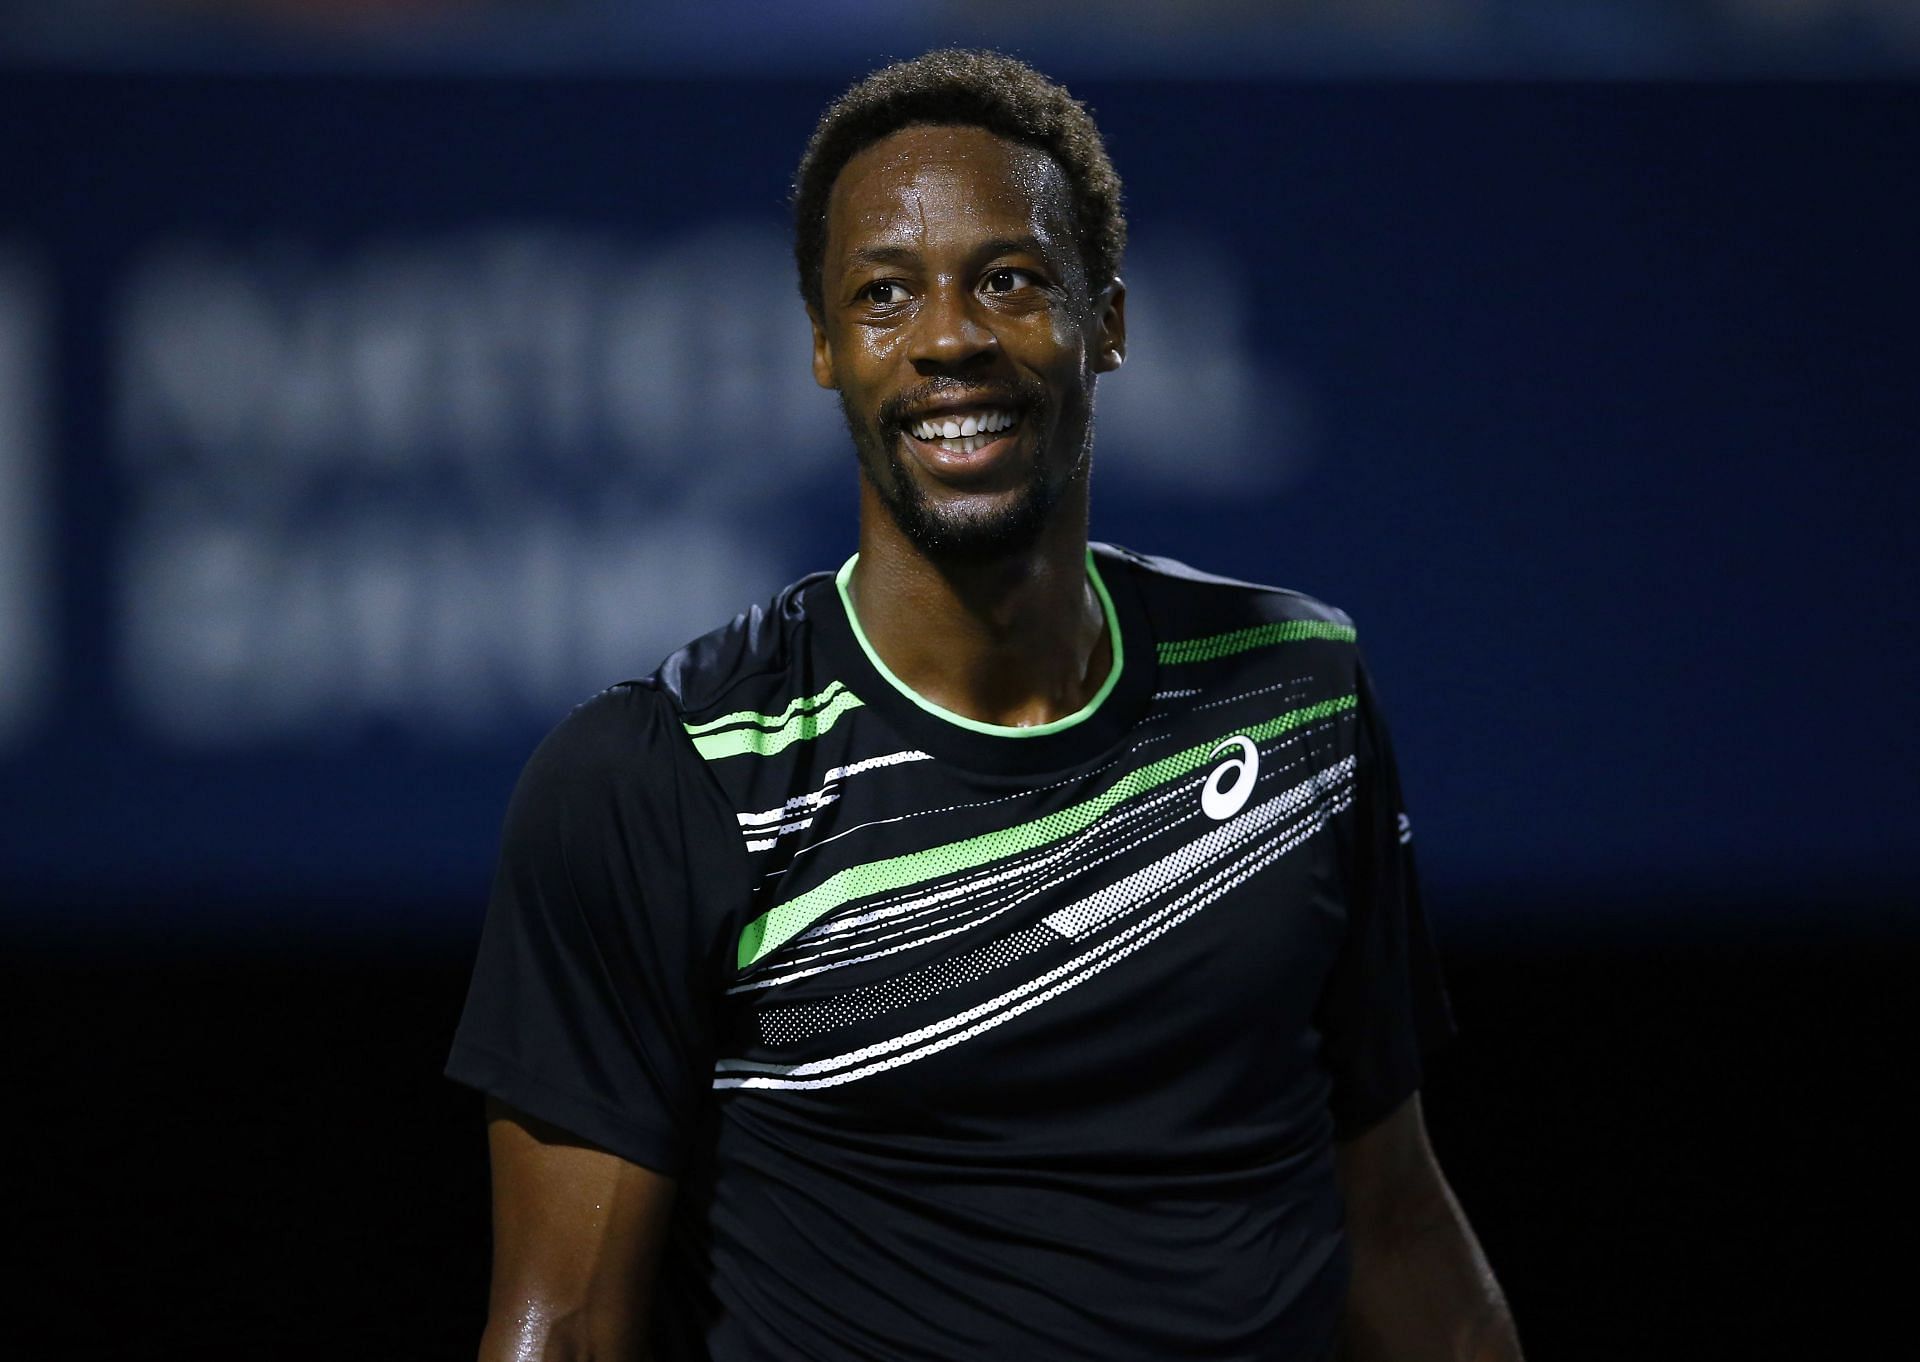 Gael Monfils at the National Bank Open Toronto.